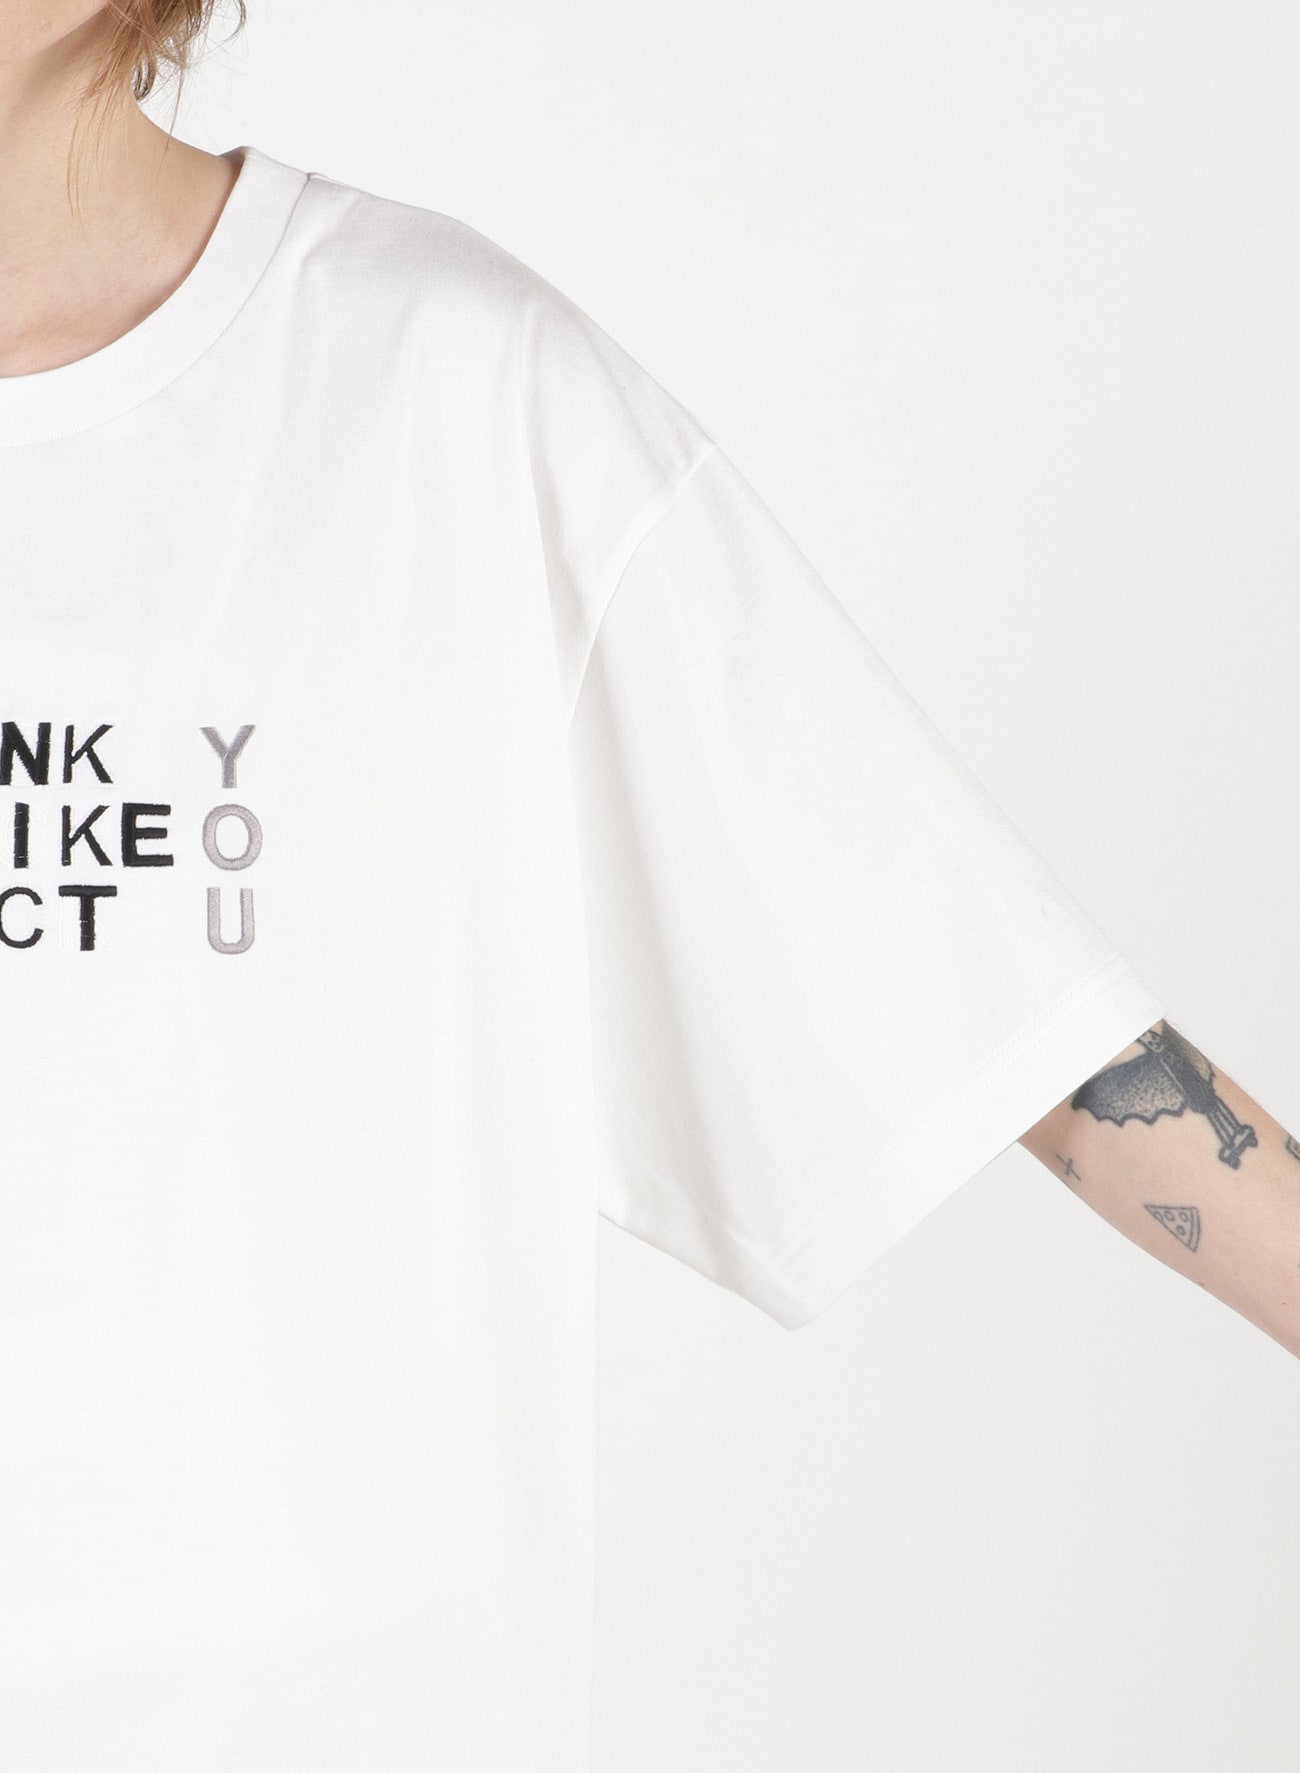 FU*K YOU Embroidery Oversized T-Shirt(S White): Vintage 1.1｜THE 